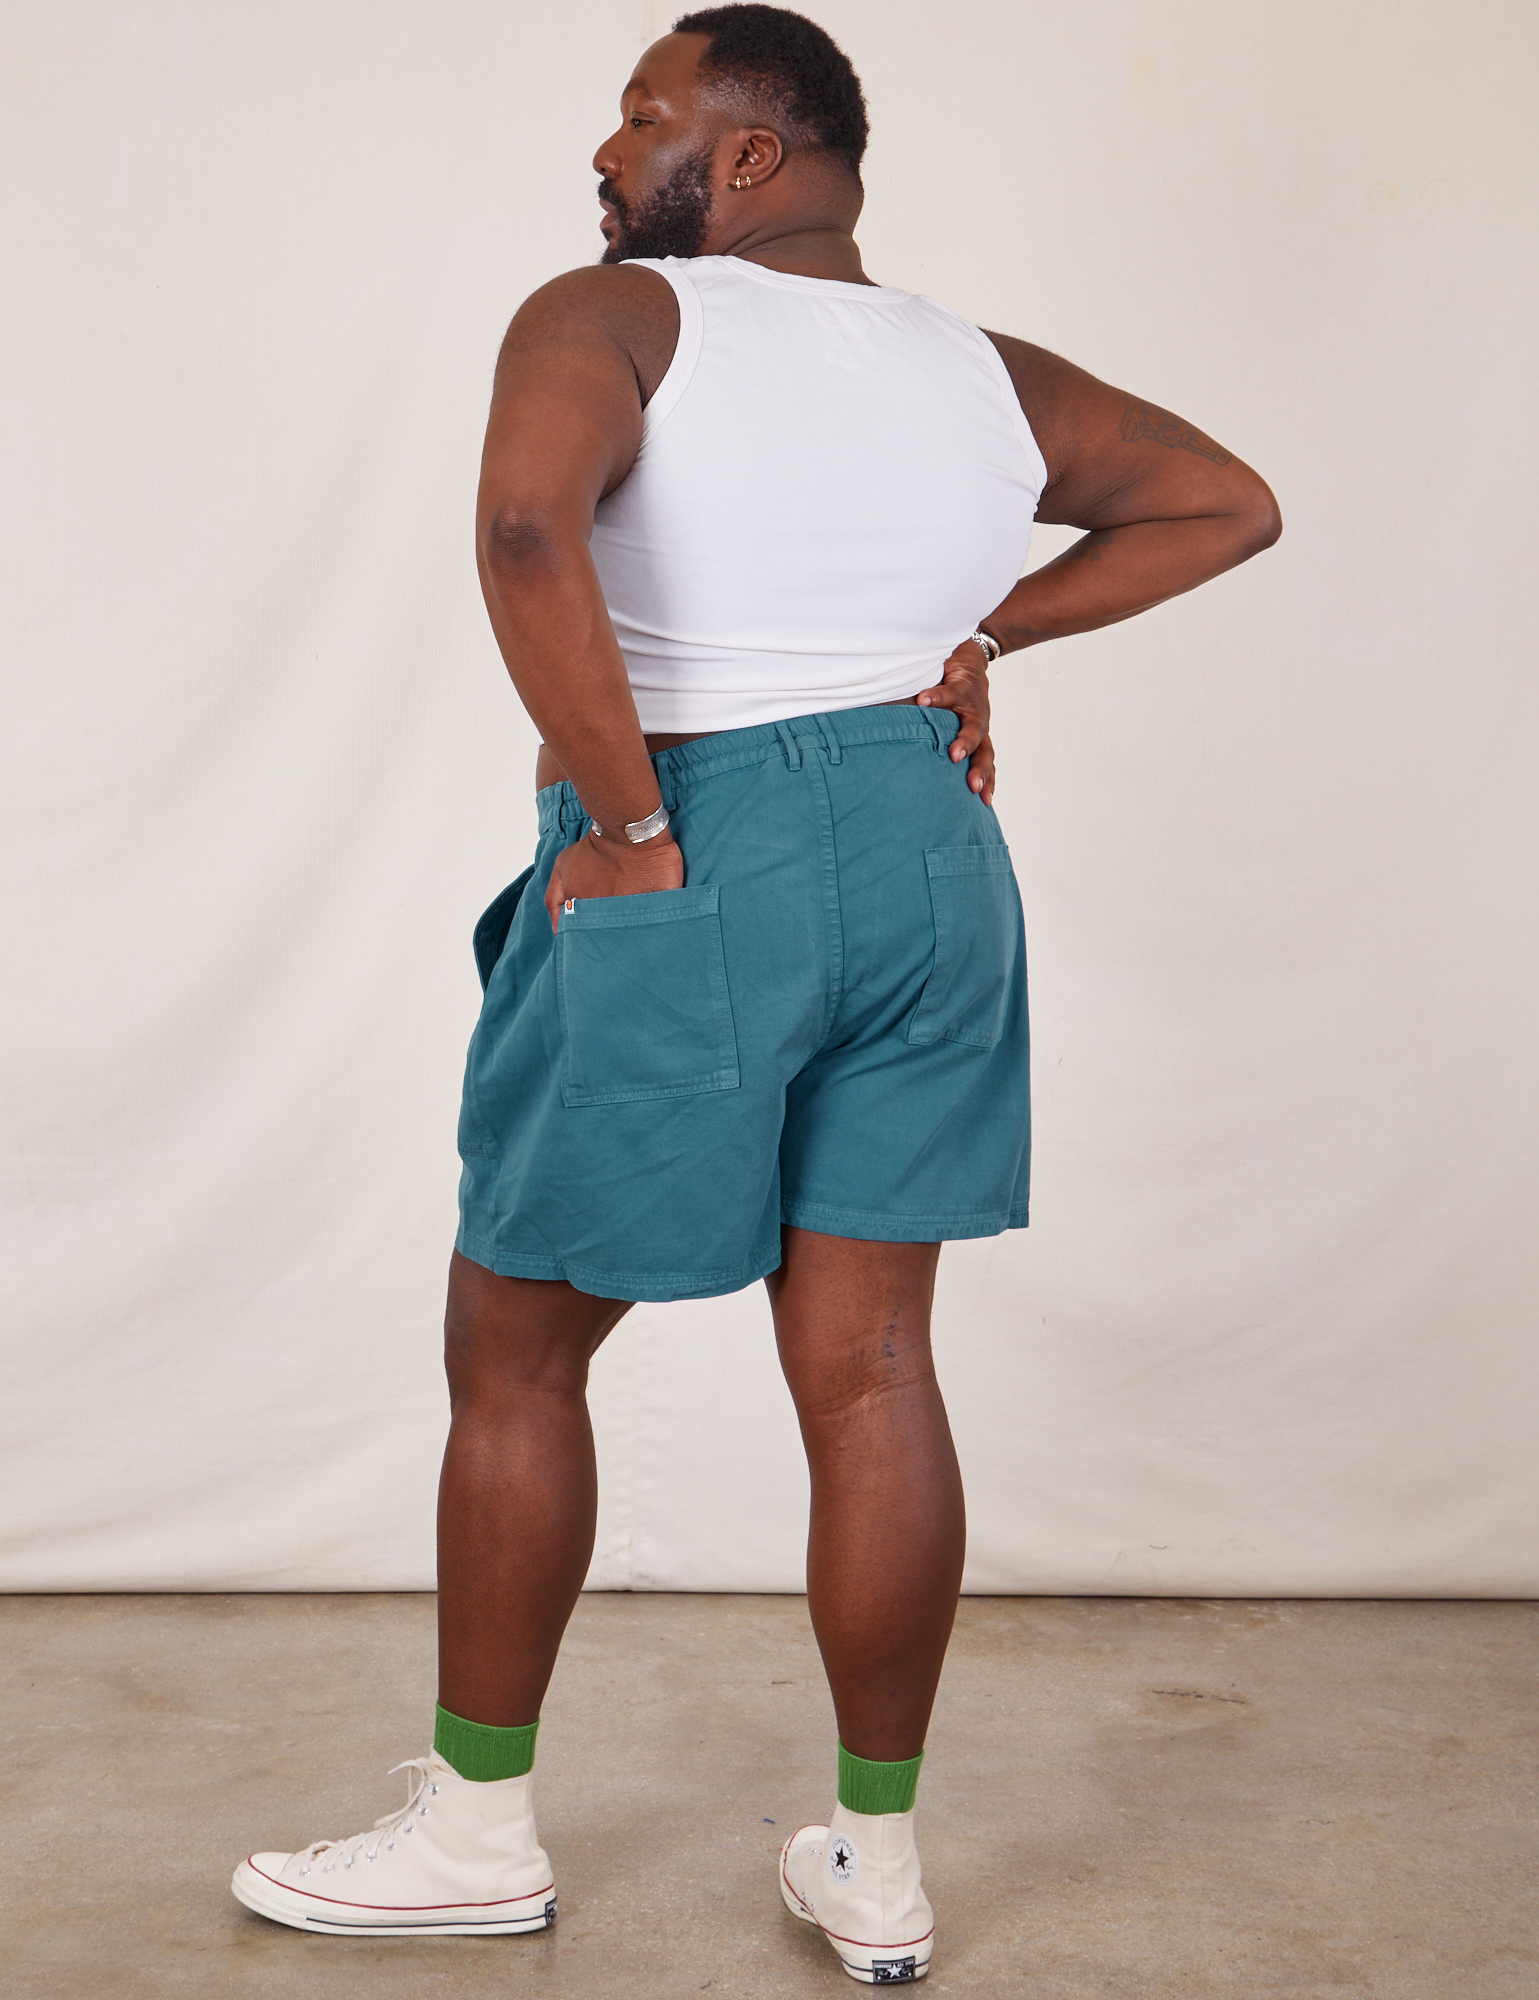 Back view of Classic Work Shorts in Marine Blue and Tank Top in vintage tee off-white on Elijah